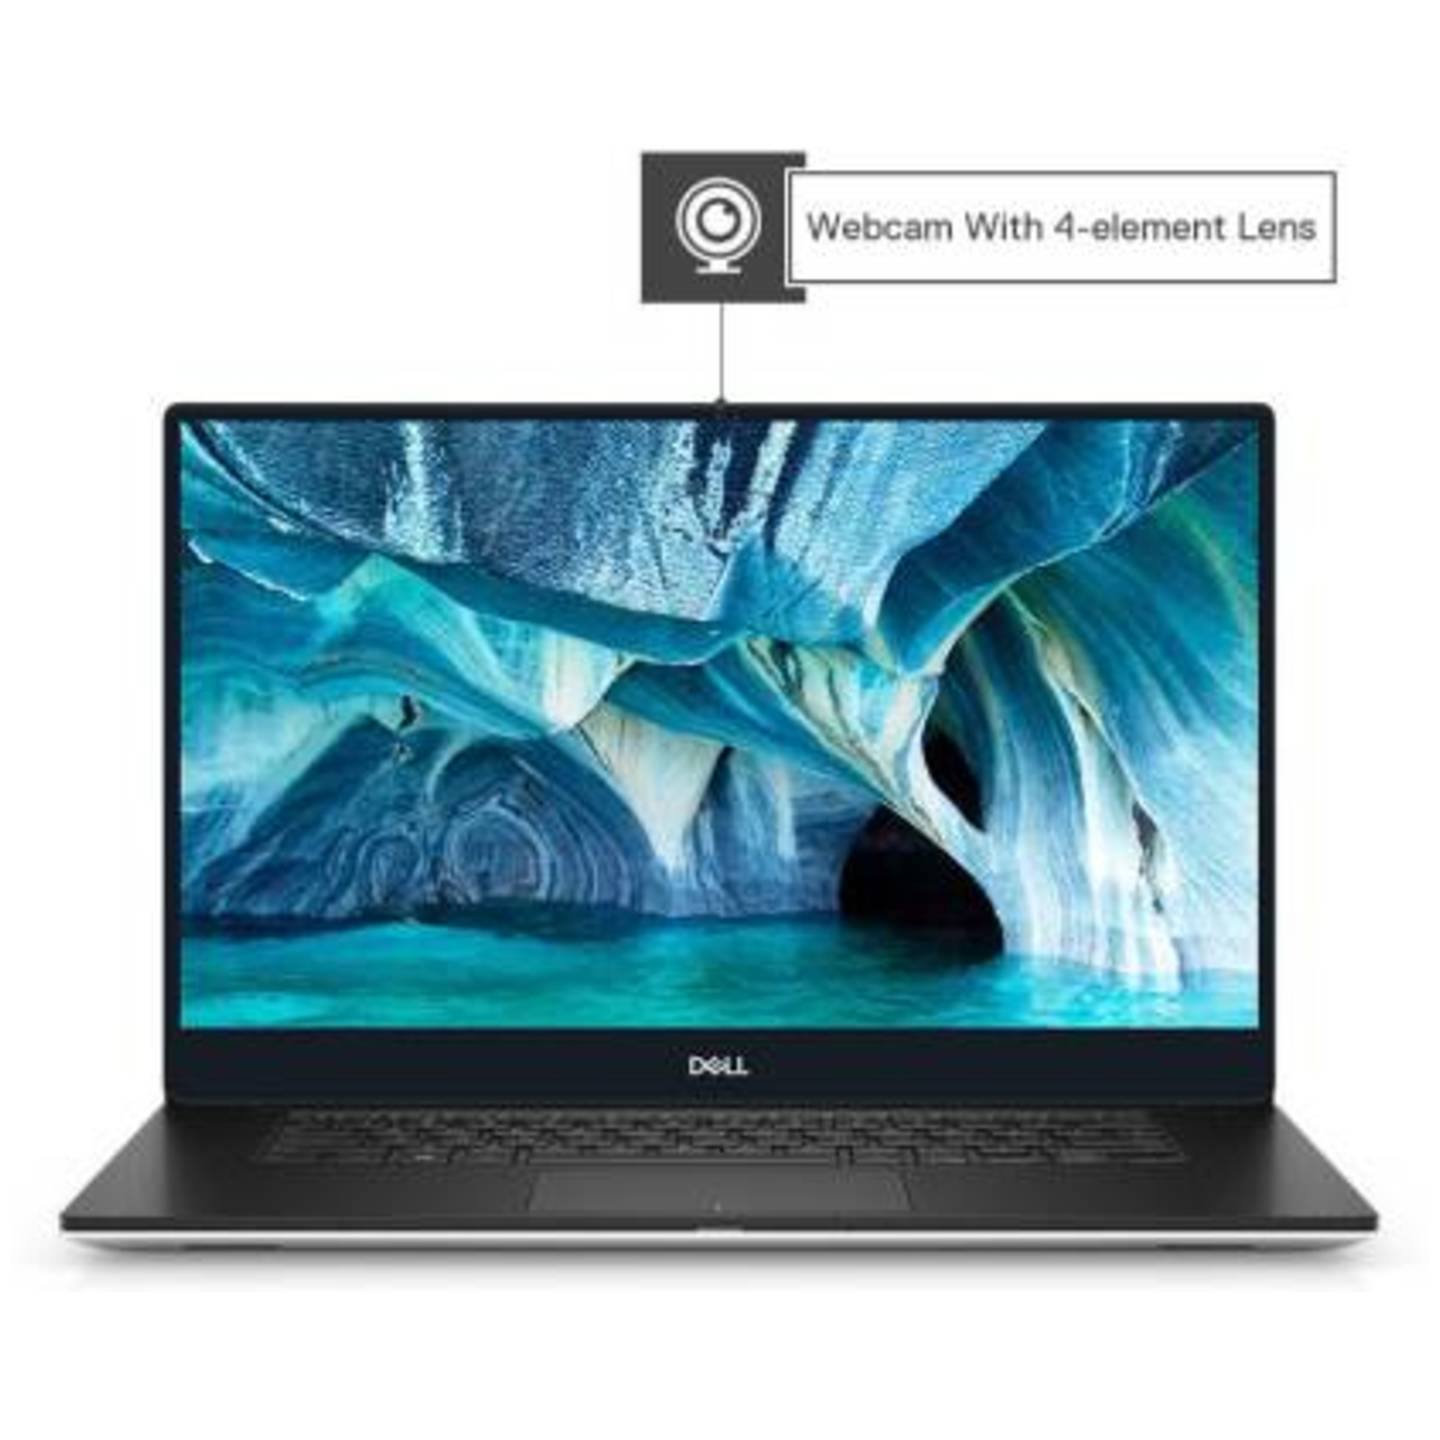 DELL XPS 15 Core i9 9th Gen - (32 GB/1 TB SSD/Windows 10 Home/4 GB Graphics) 7590 Laptop  (15.6 inch, Silver, 2 kg, With MS Office)